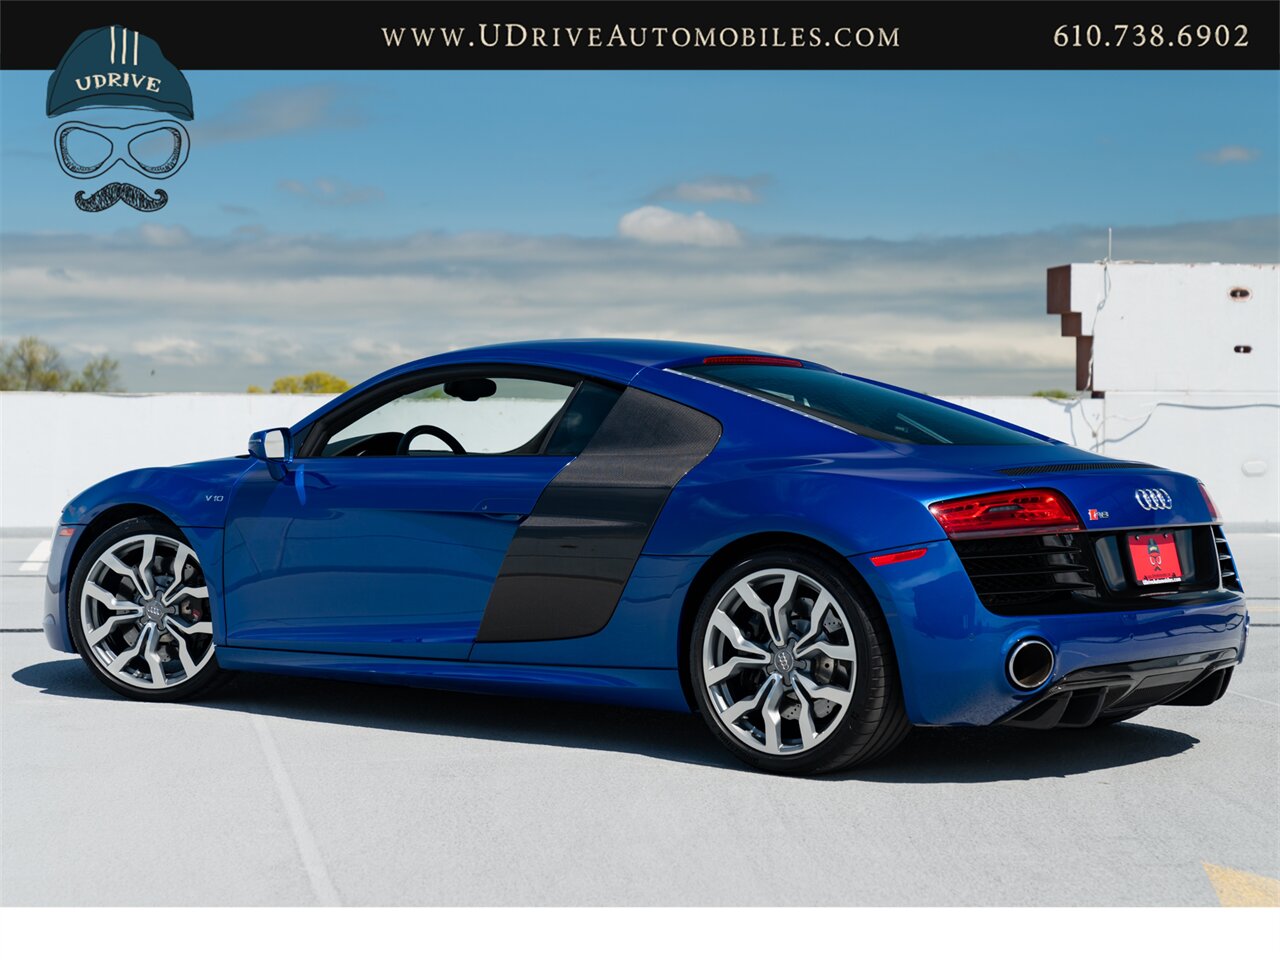 2015 Audi R8 5.2 V10 Quattro 6 Speed Manual 10k Miles  Diamond Stitched Leather 1 of 2 - Photo 4 - West Chester, PA 19382